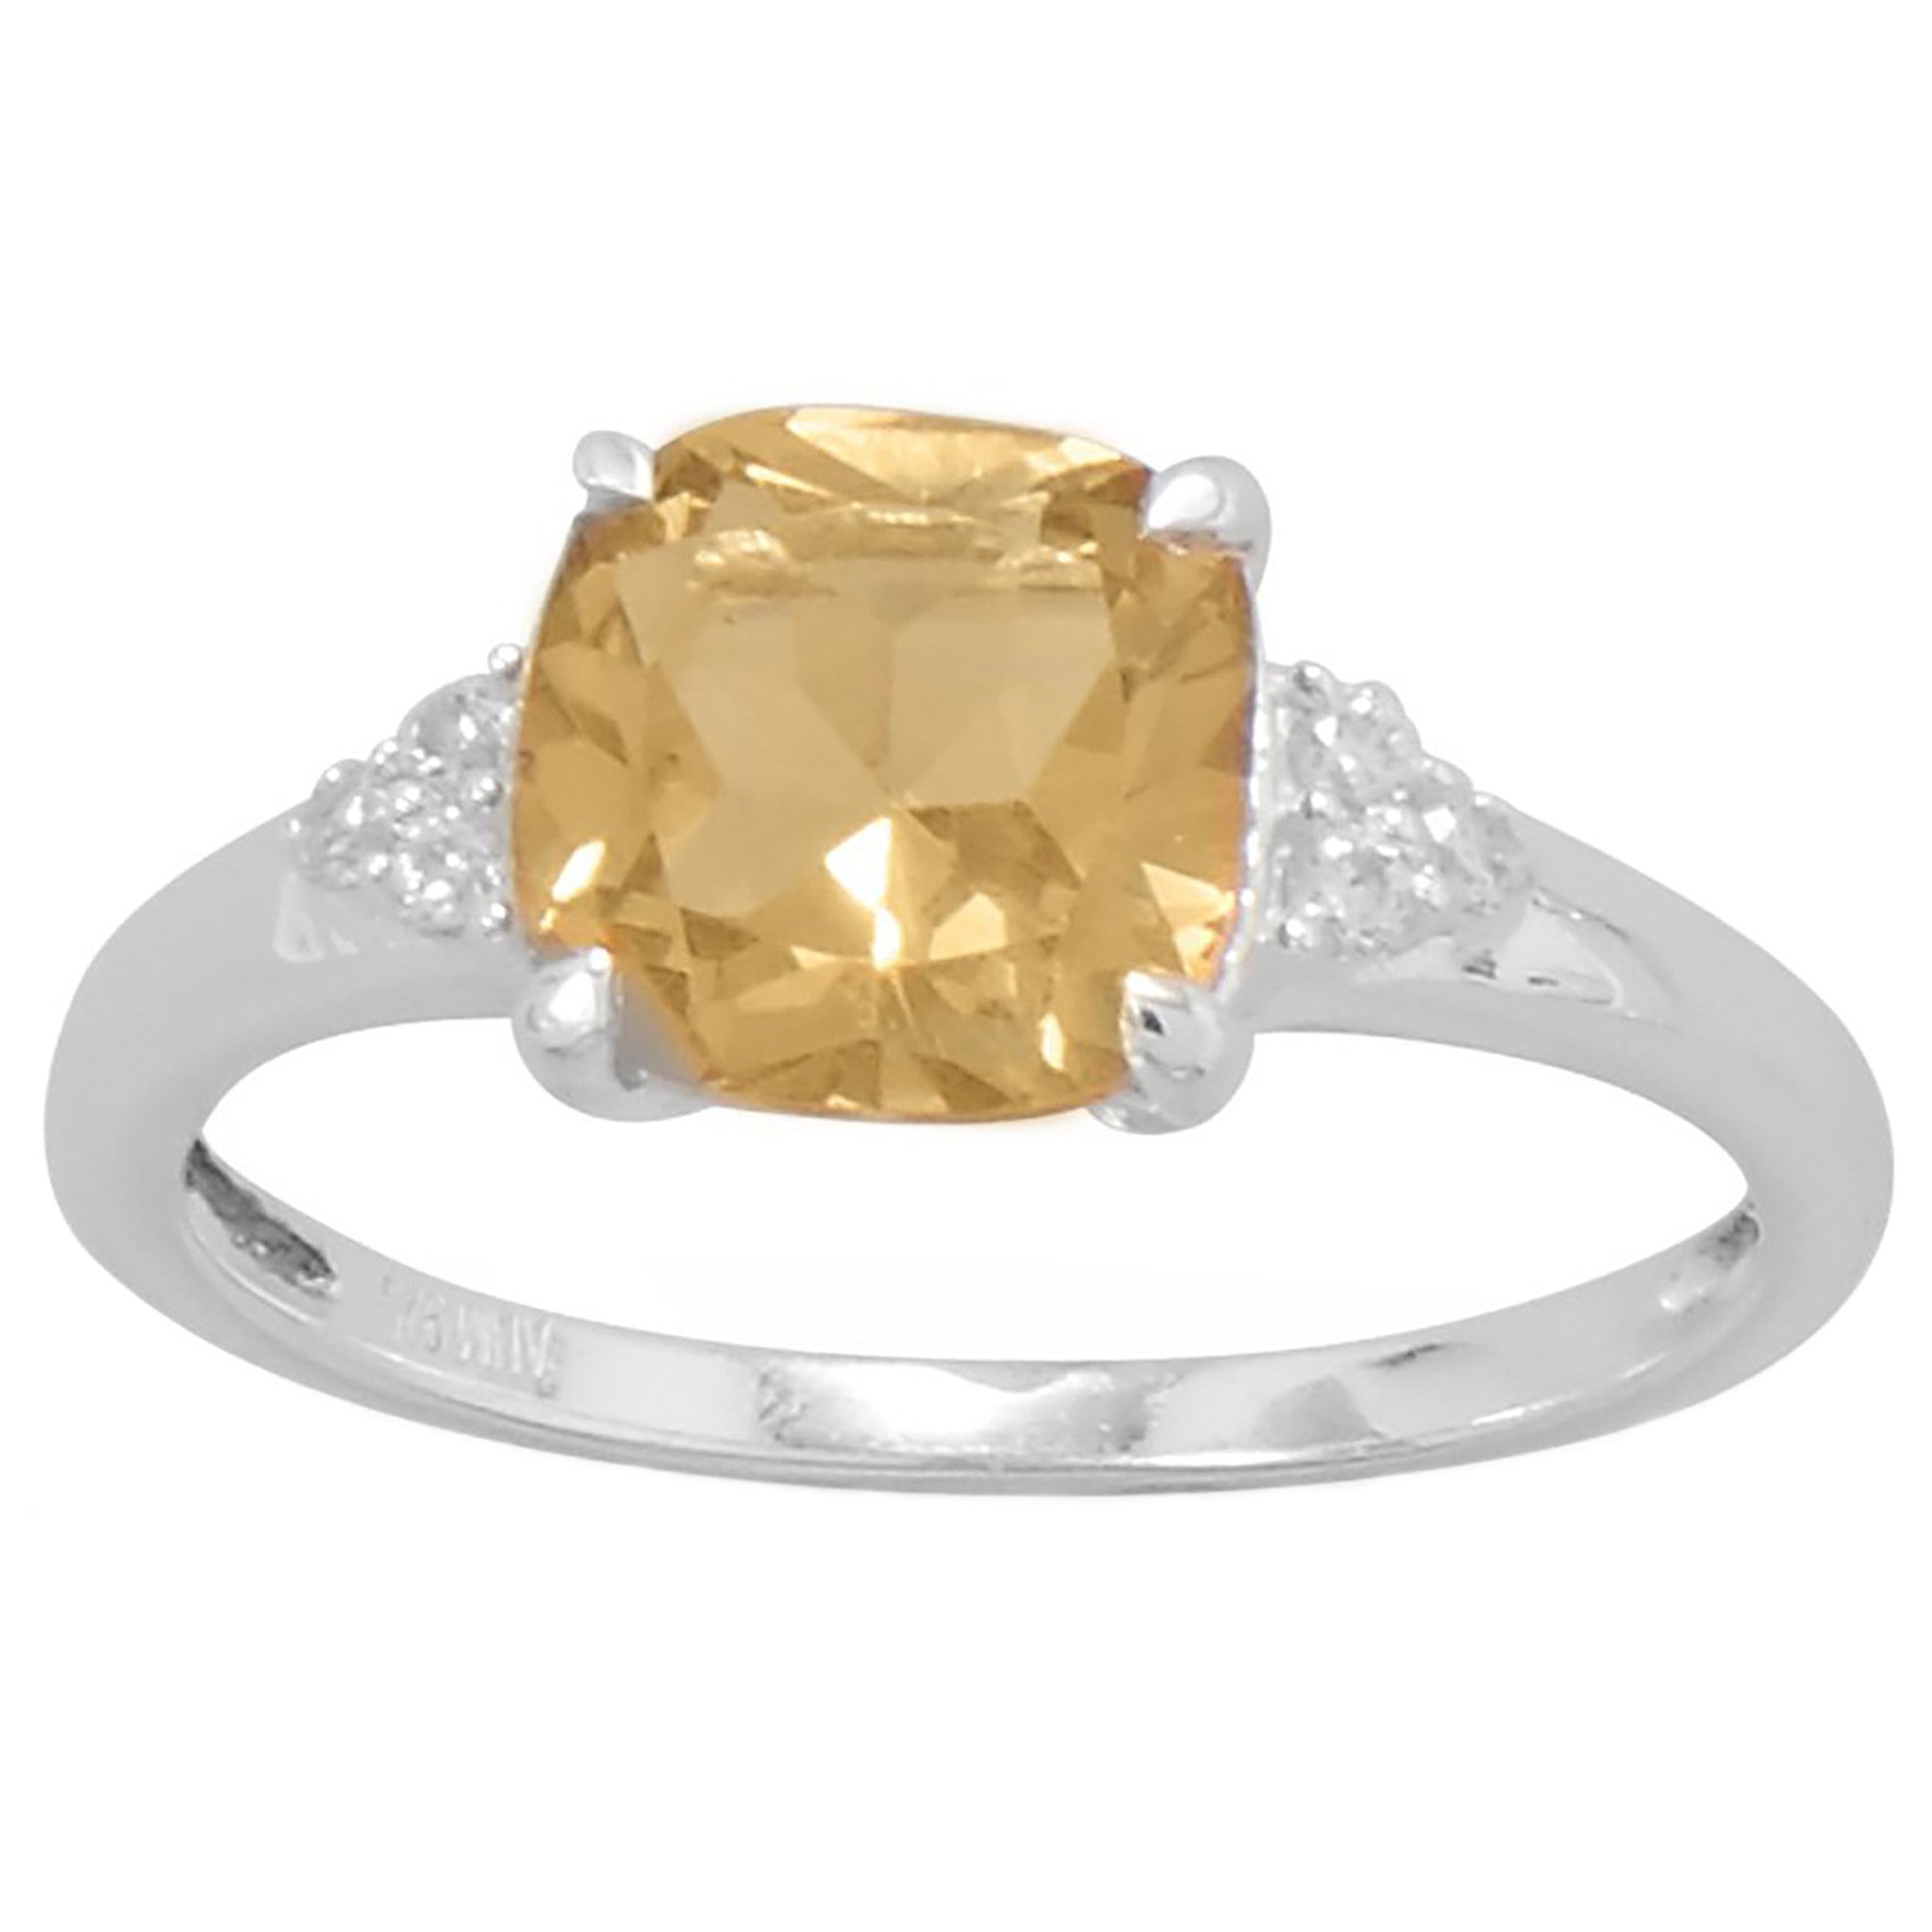 Citrine and Cubic Zirconia Ring